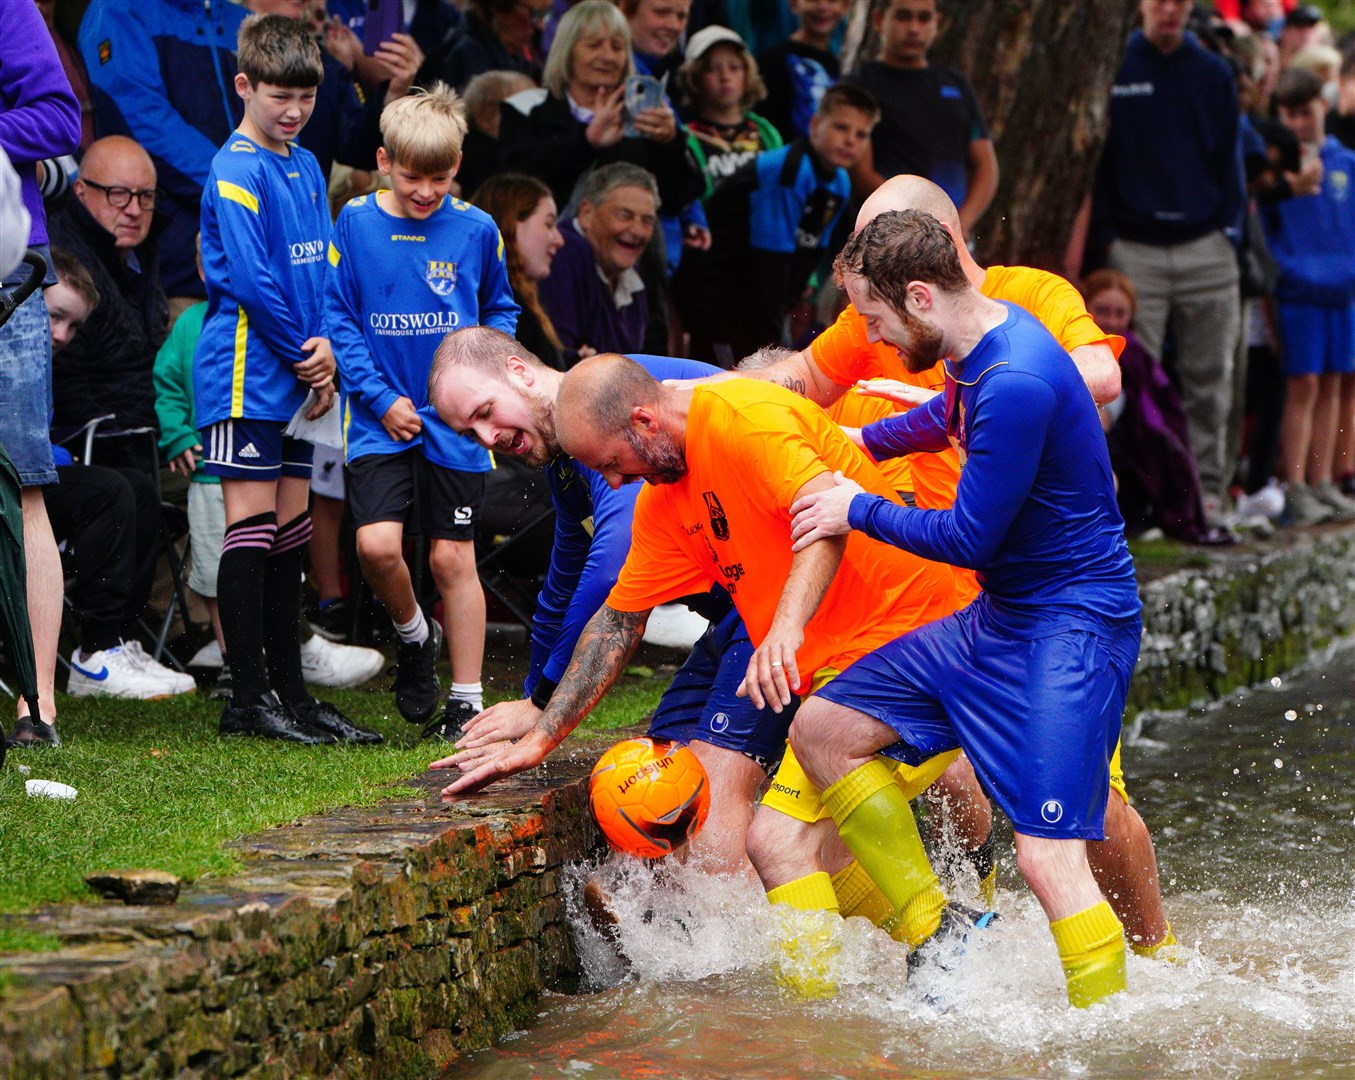 The match has happened in the village annually for more than 100 years (Ben Birchall/PA)